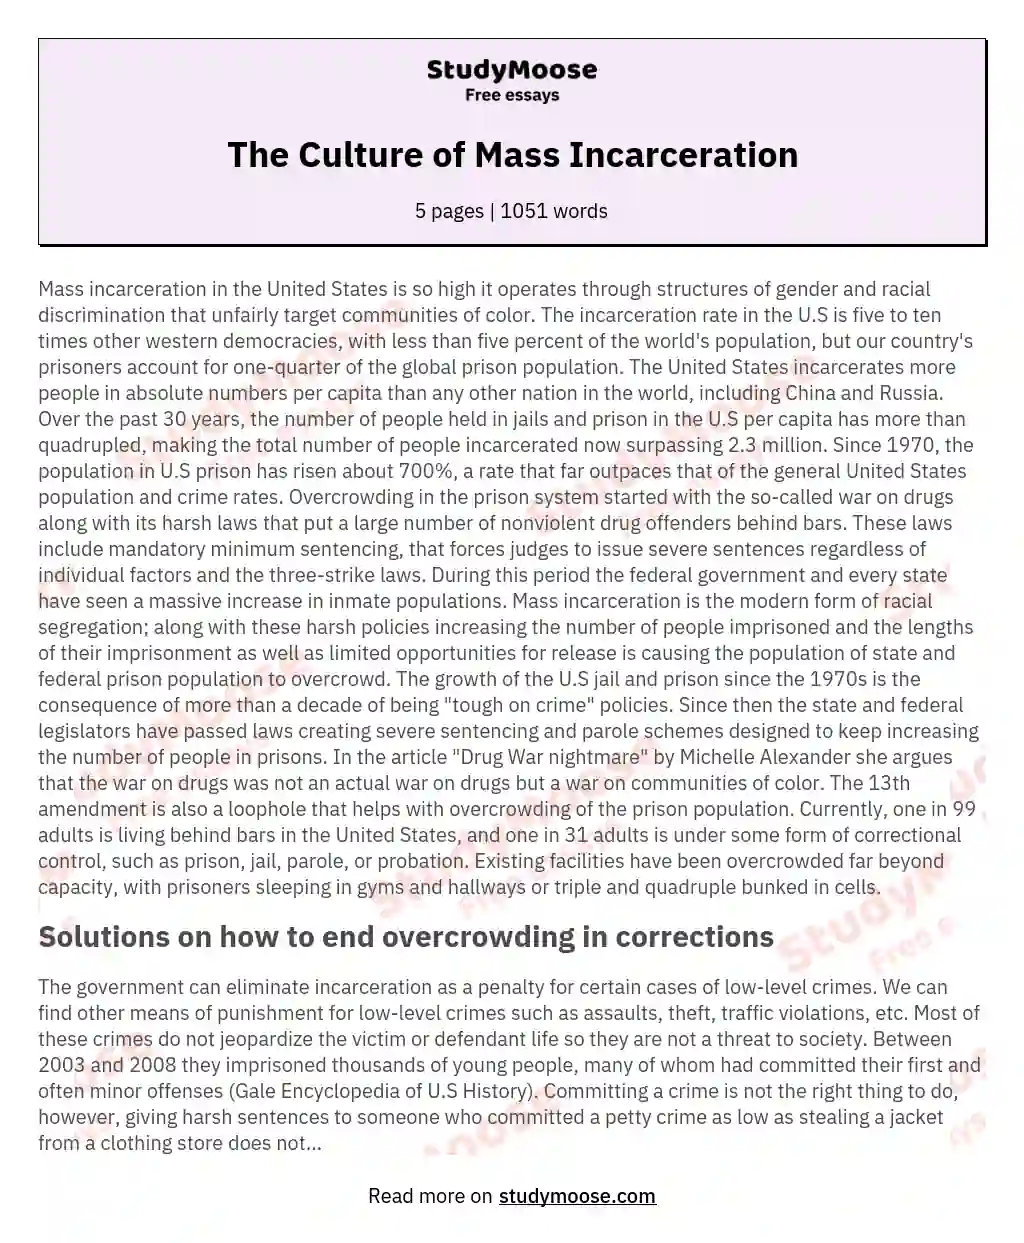 The Culture of Mass Incarceration